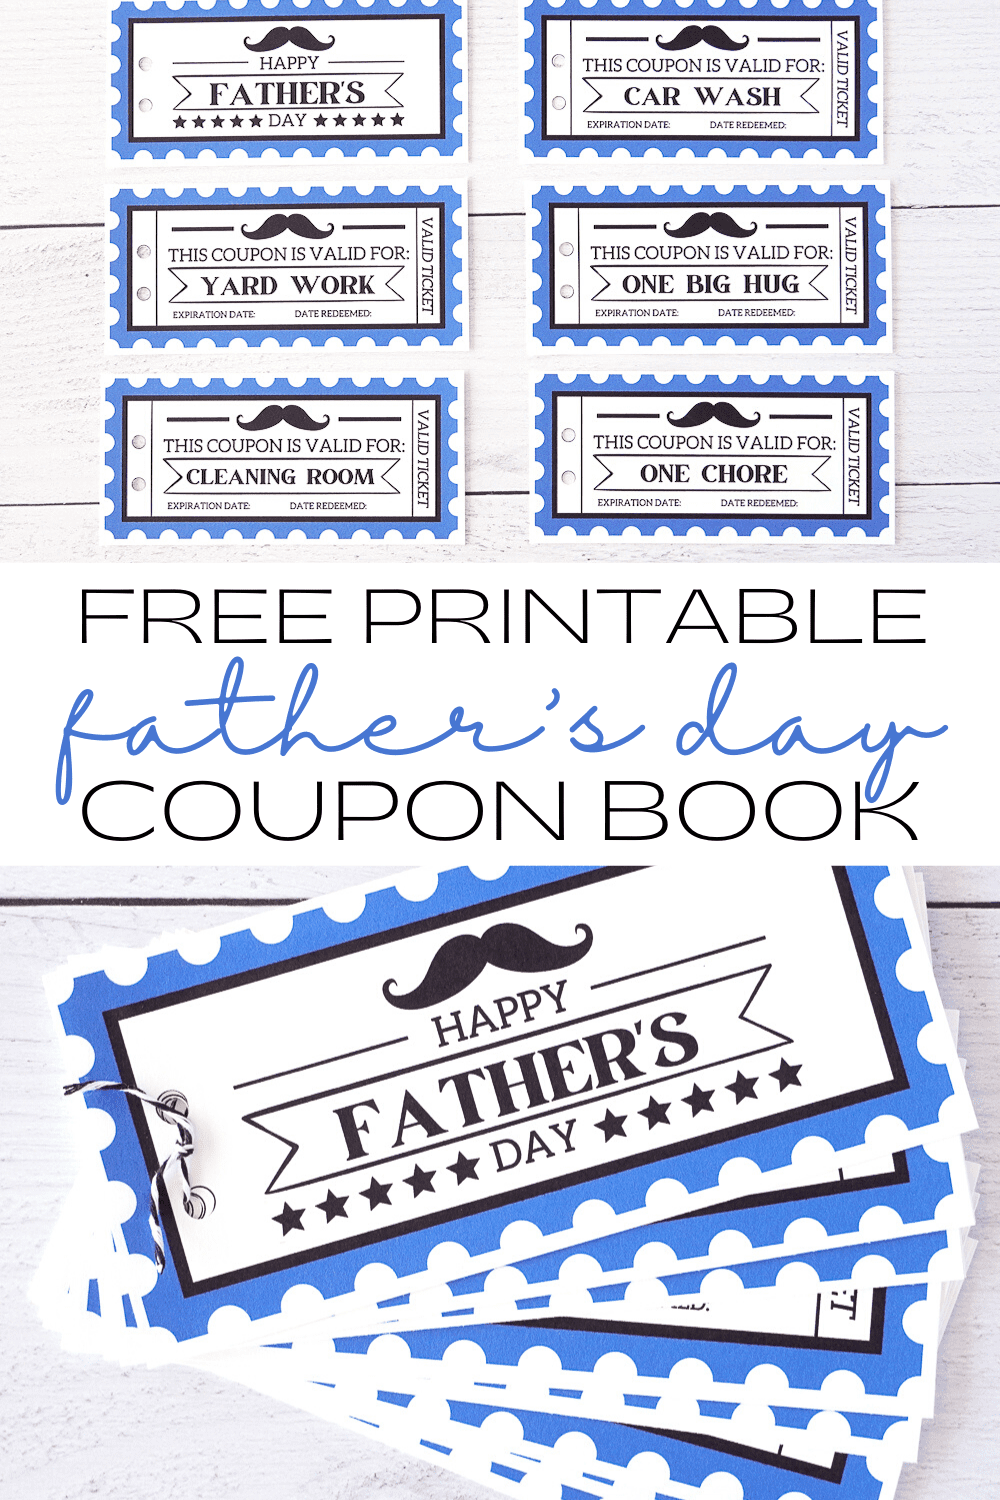 Free Printable Father s Day Coupon Book Prudent Penny Pincher